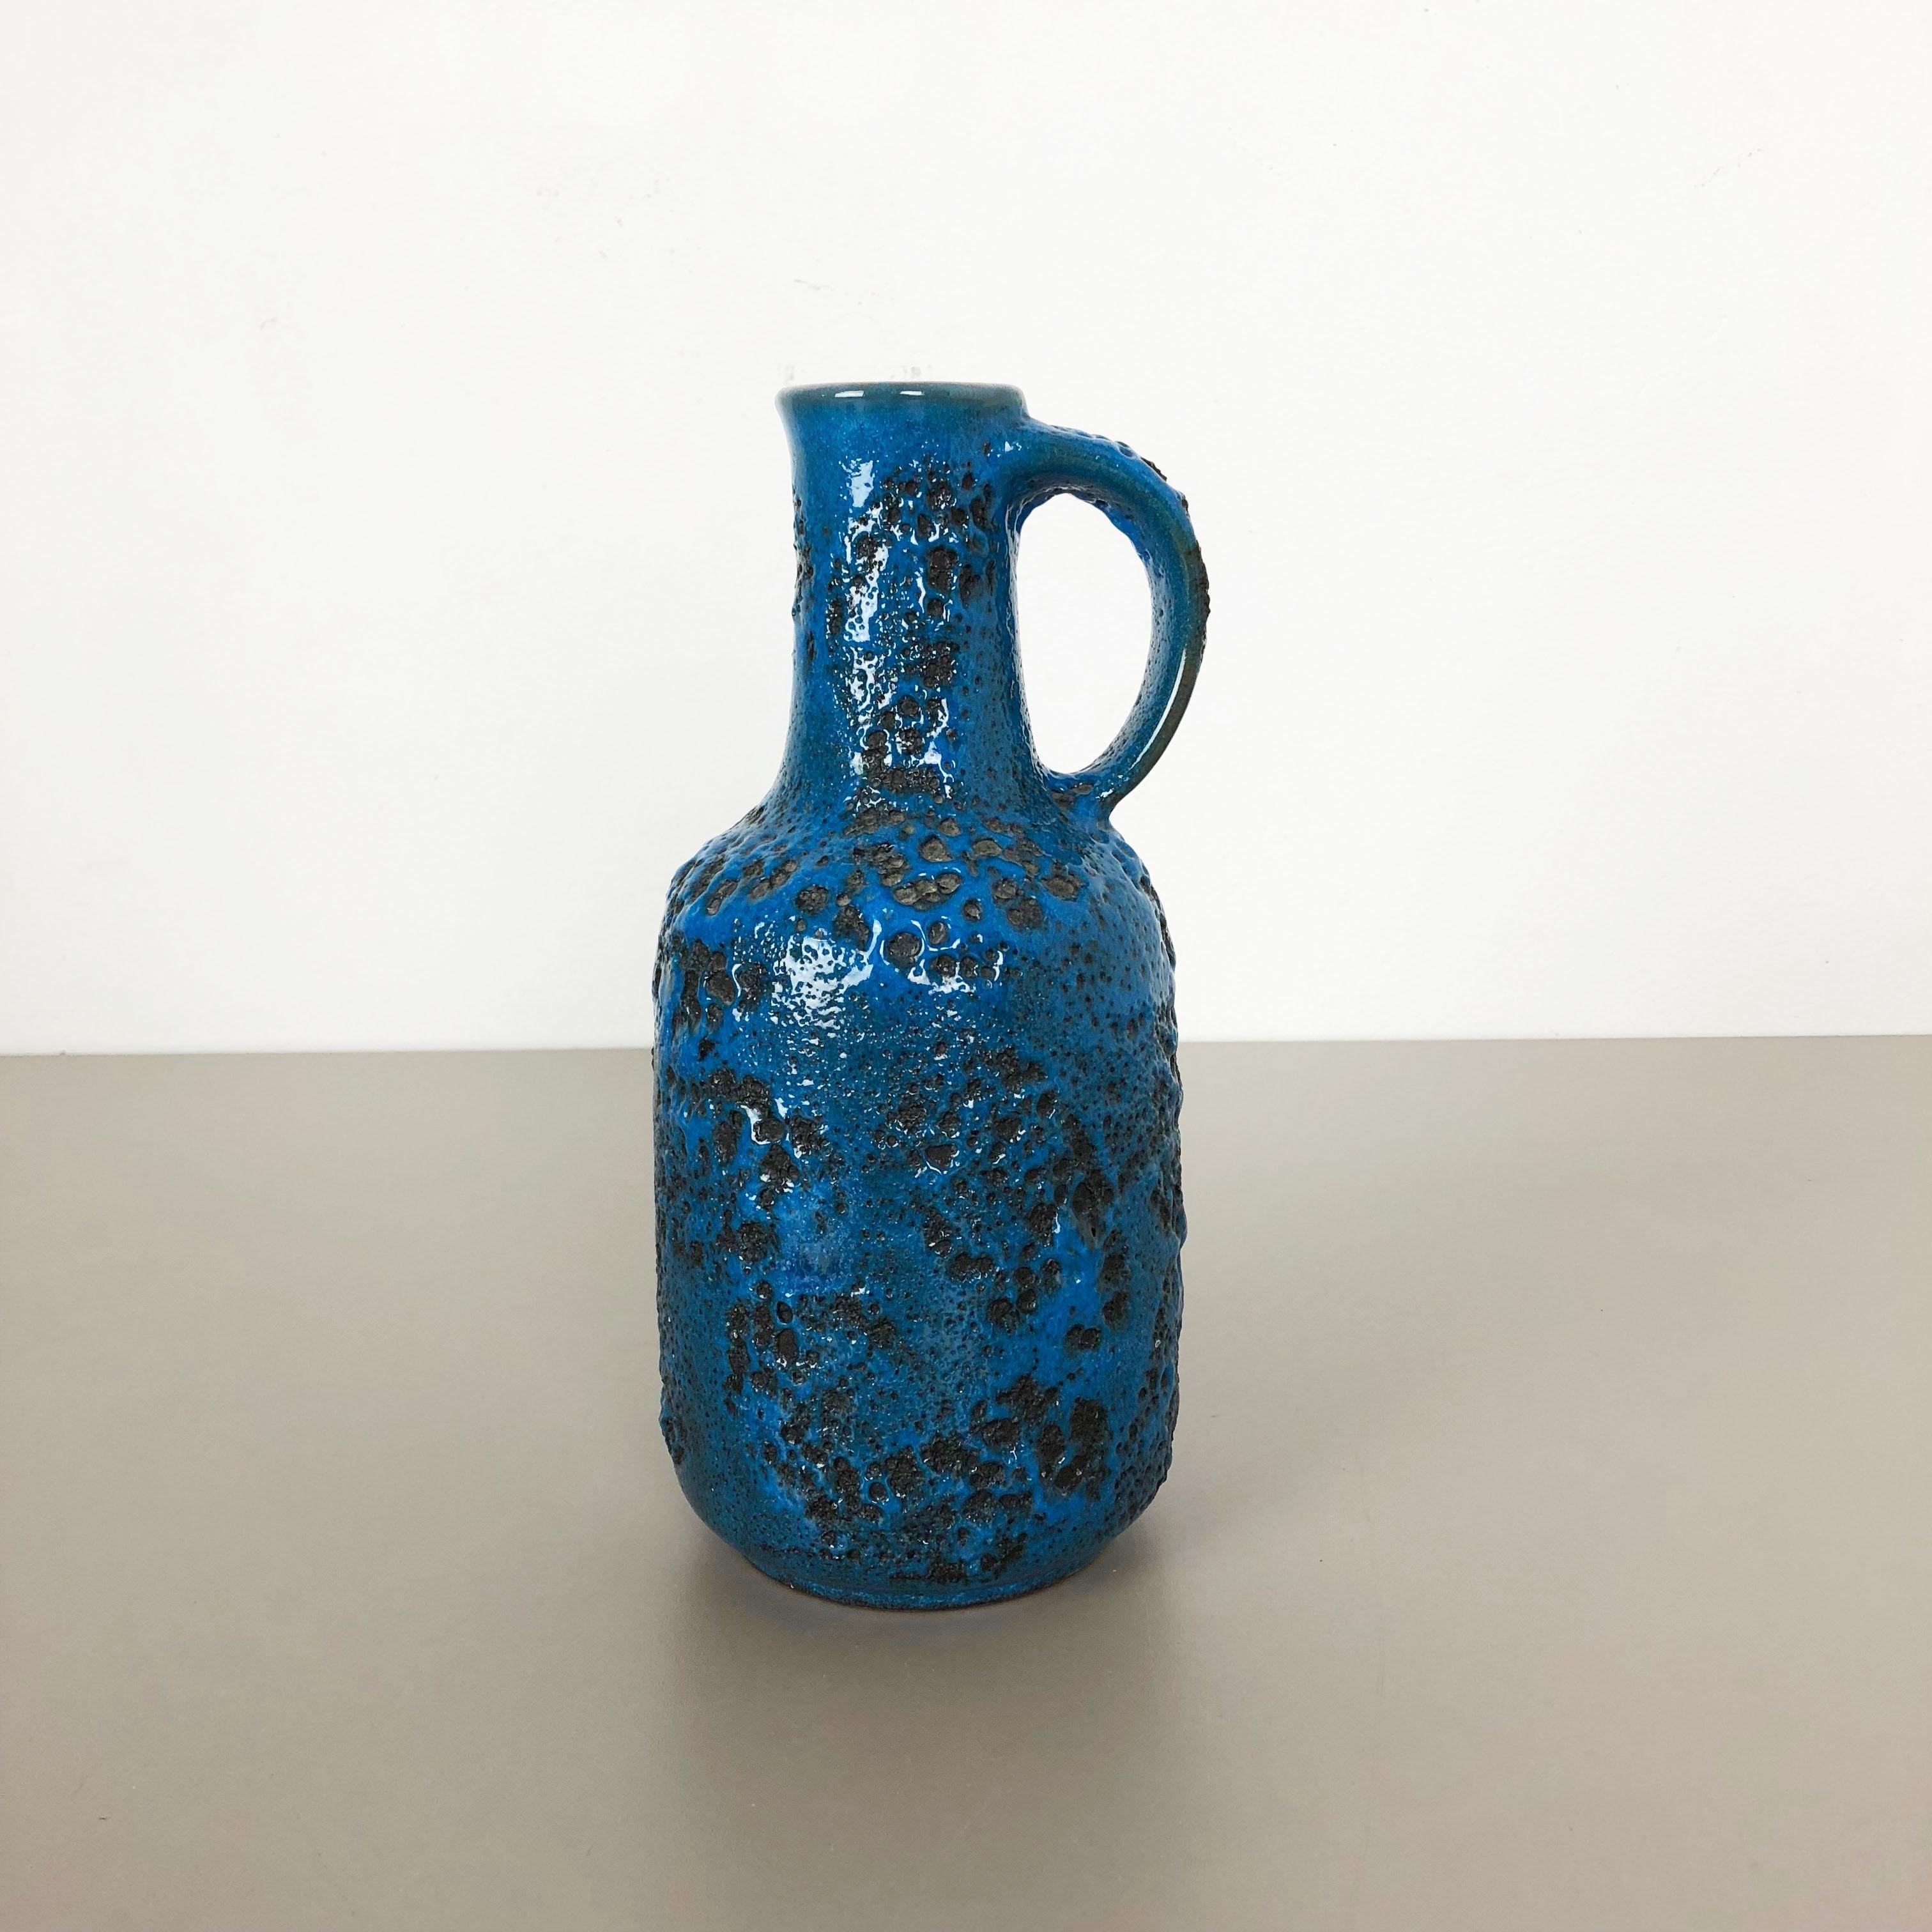 Article:

Pottery ceramic vase


Producer:

Gräflich Ortenburg, Germany



Decade:

1960s




Original vintage 1960s pottery ceramic vase made in Germany. High quality German production with a nice abstract glaze structure and